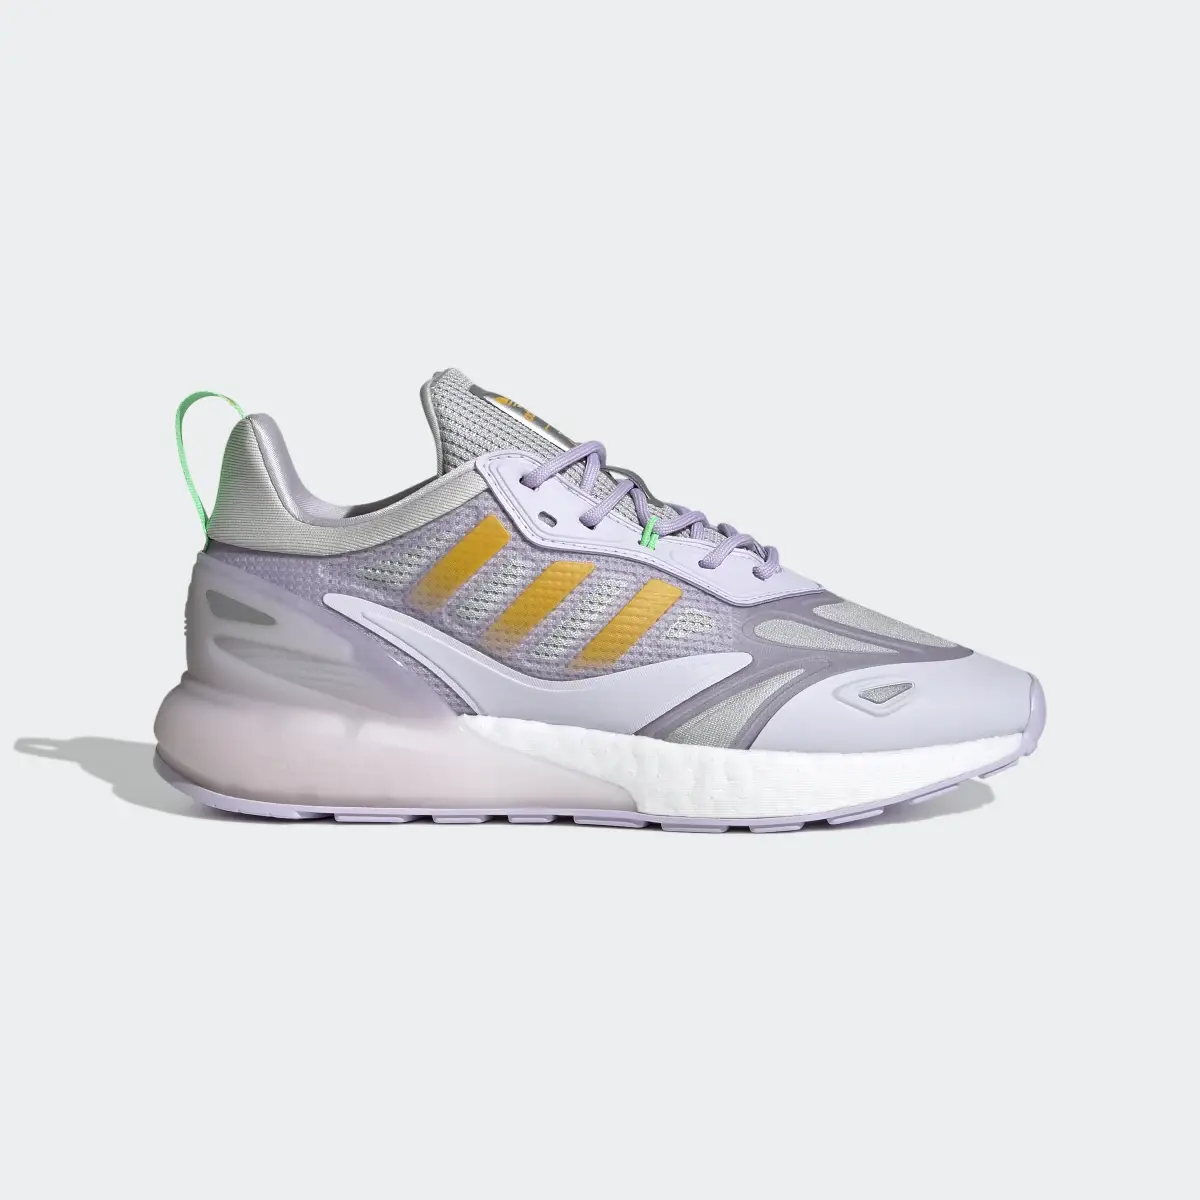 Adidas ZX 2K Boost 2.0 Shoes. 2